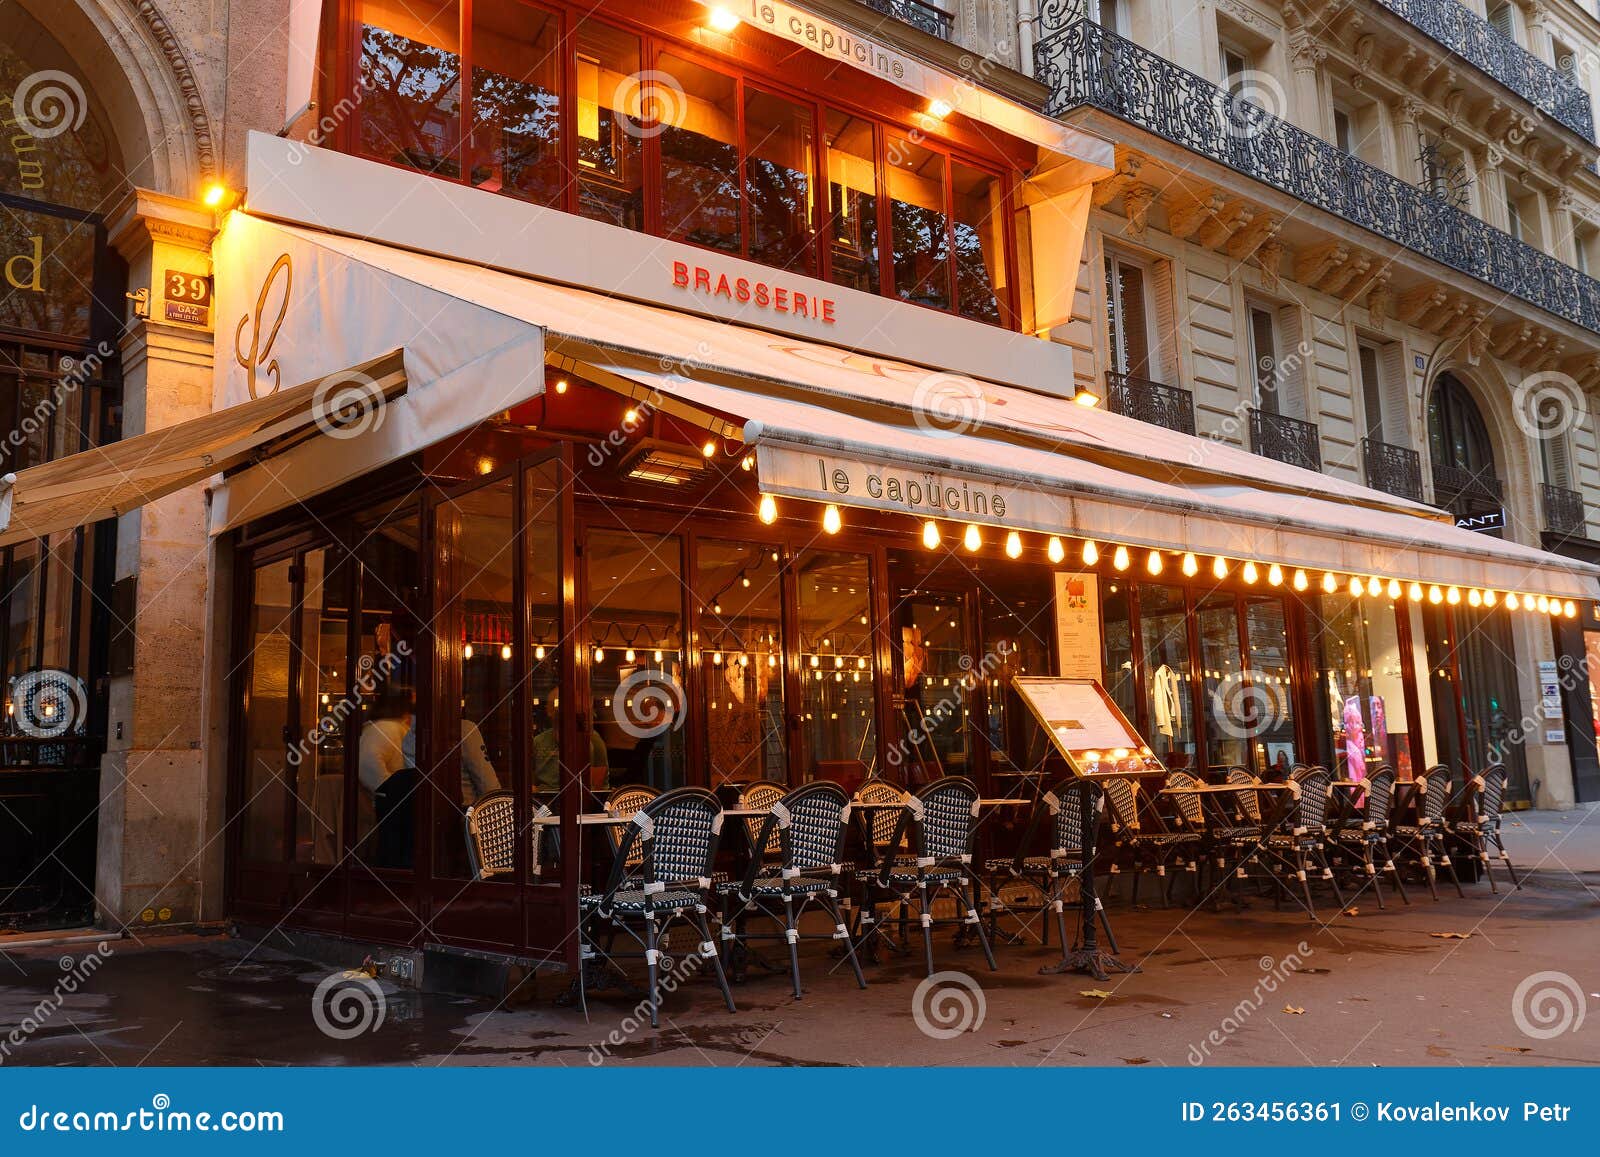 The Traditional French Brasserie Le Capucine Located at Capucine ...